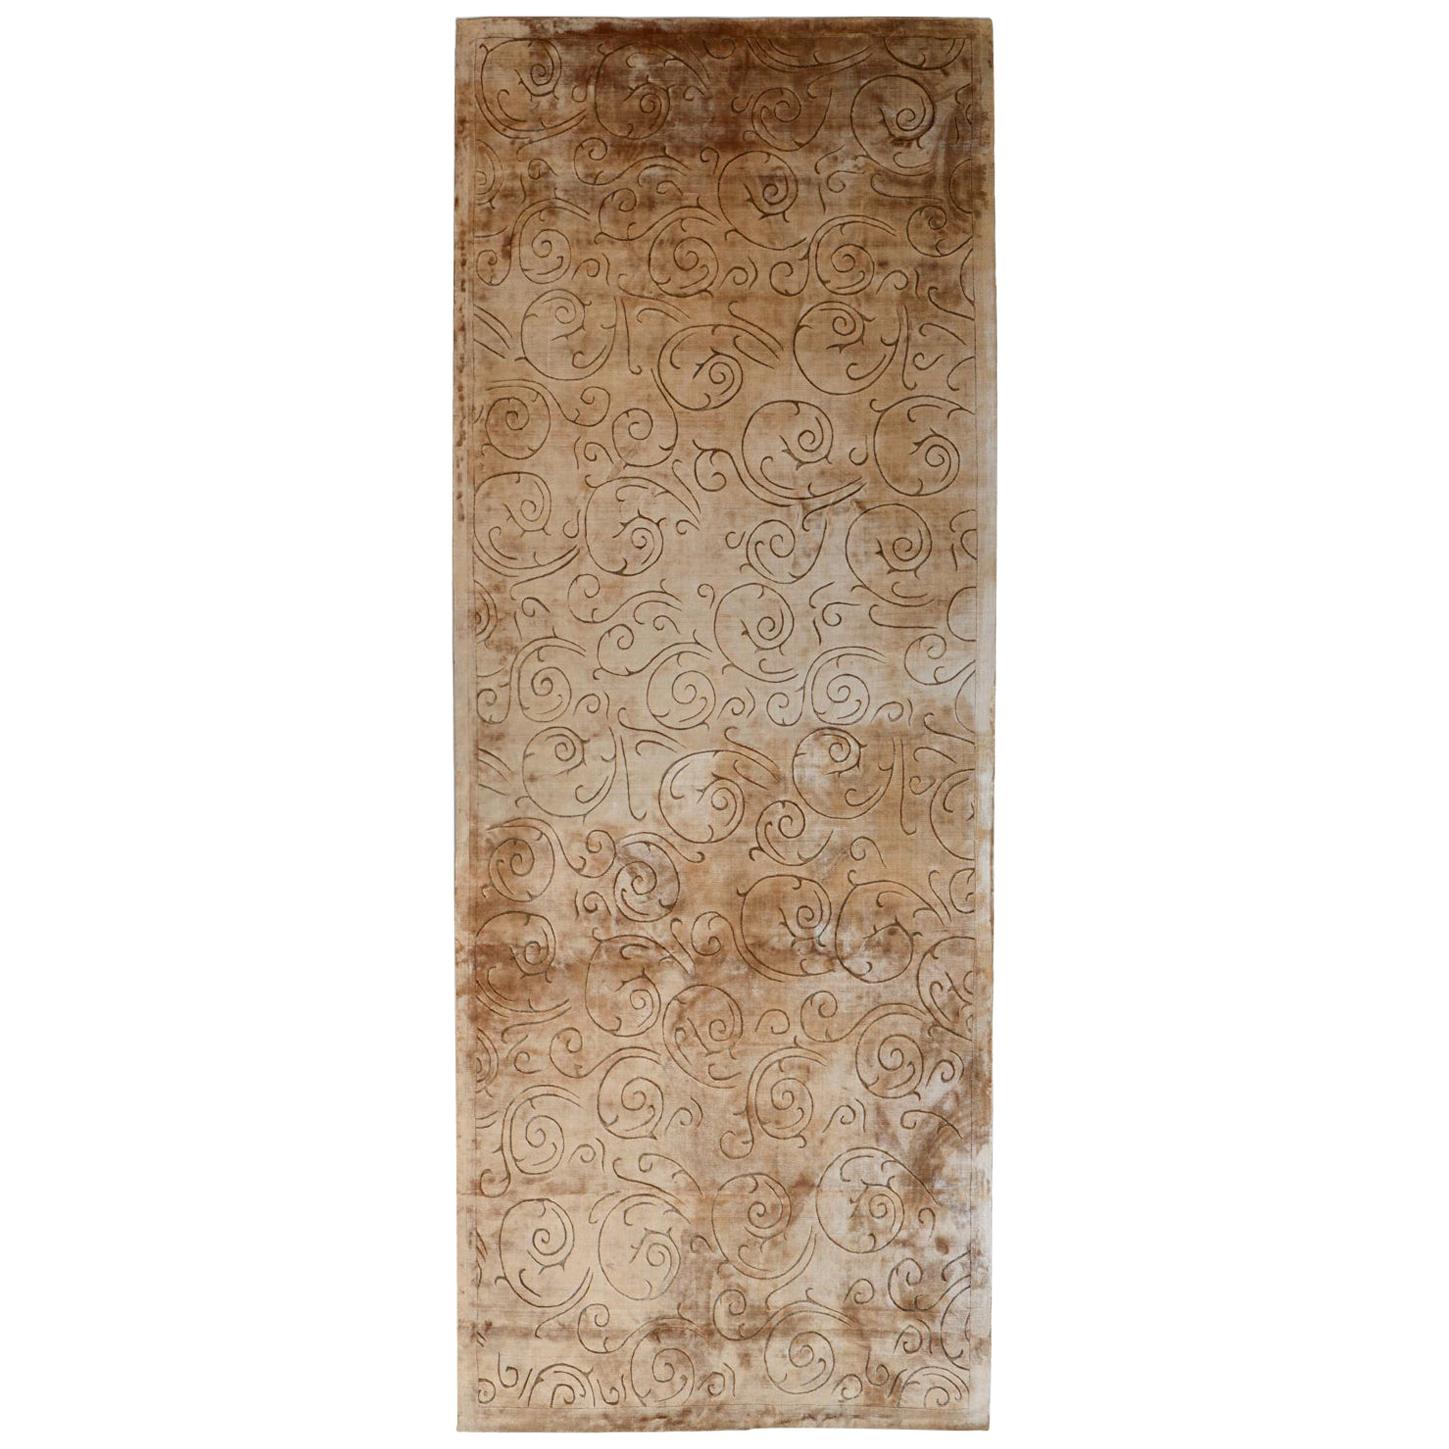 Soft Warm Colors Floral Drawings Contemporary Rug In Stock 200x510 cm For Sale